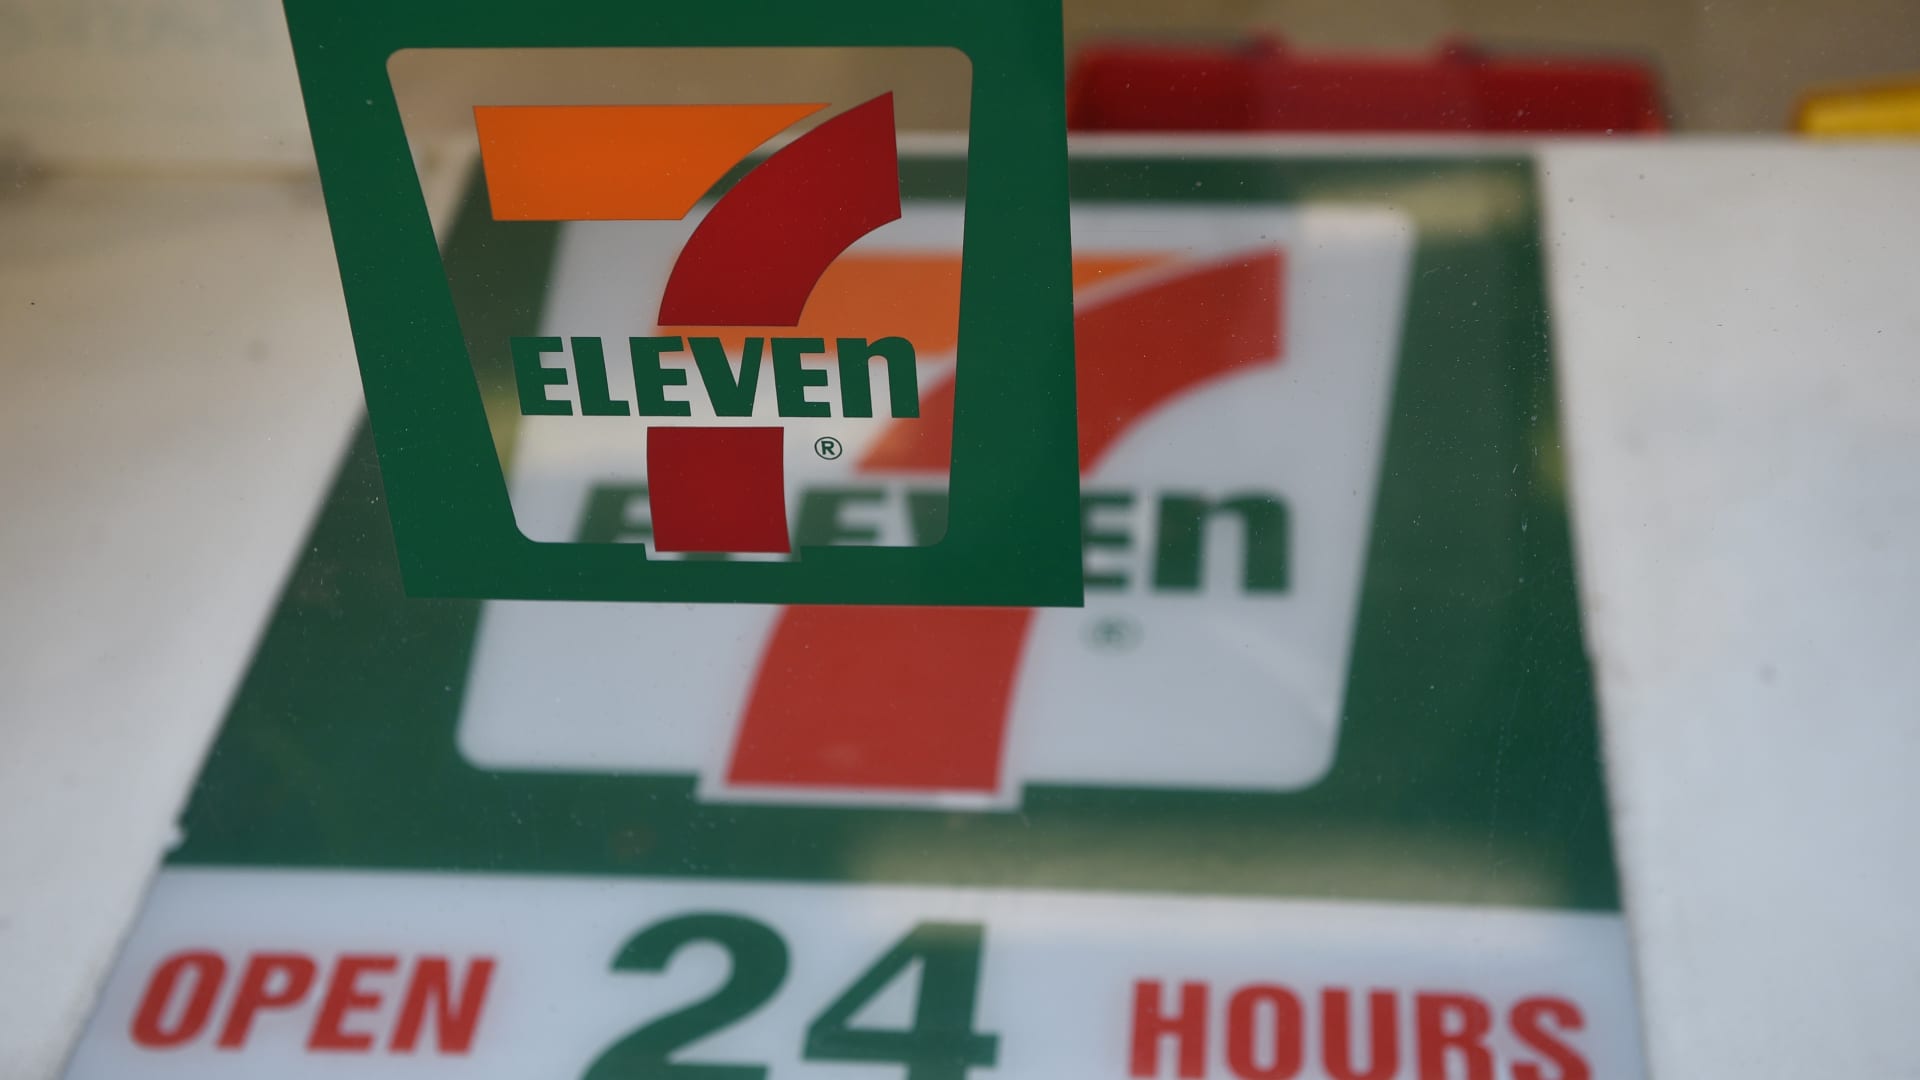 convenience-store-chain-7-eleven-cuts-880-corporate-jobs-as-part-of-restructuring